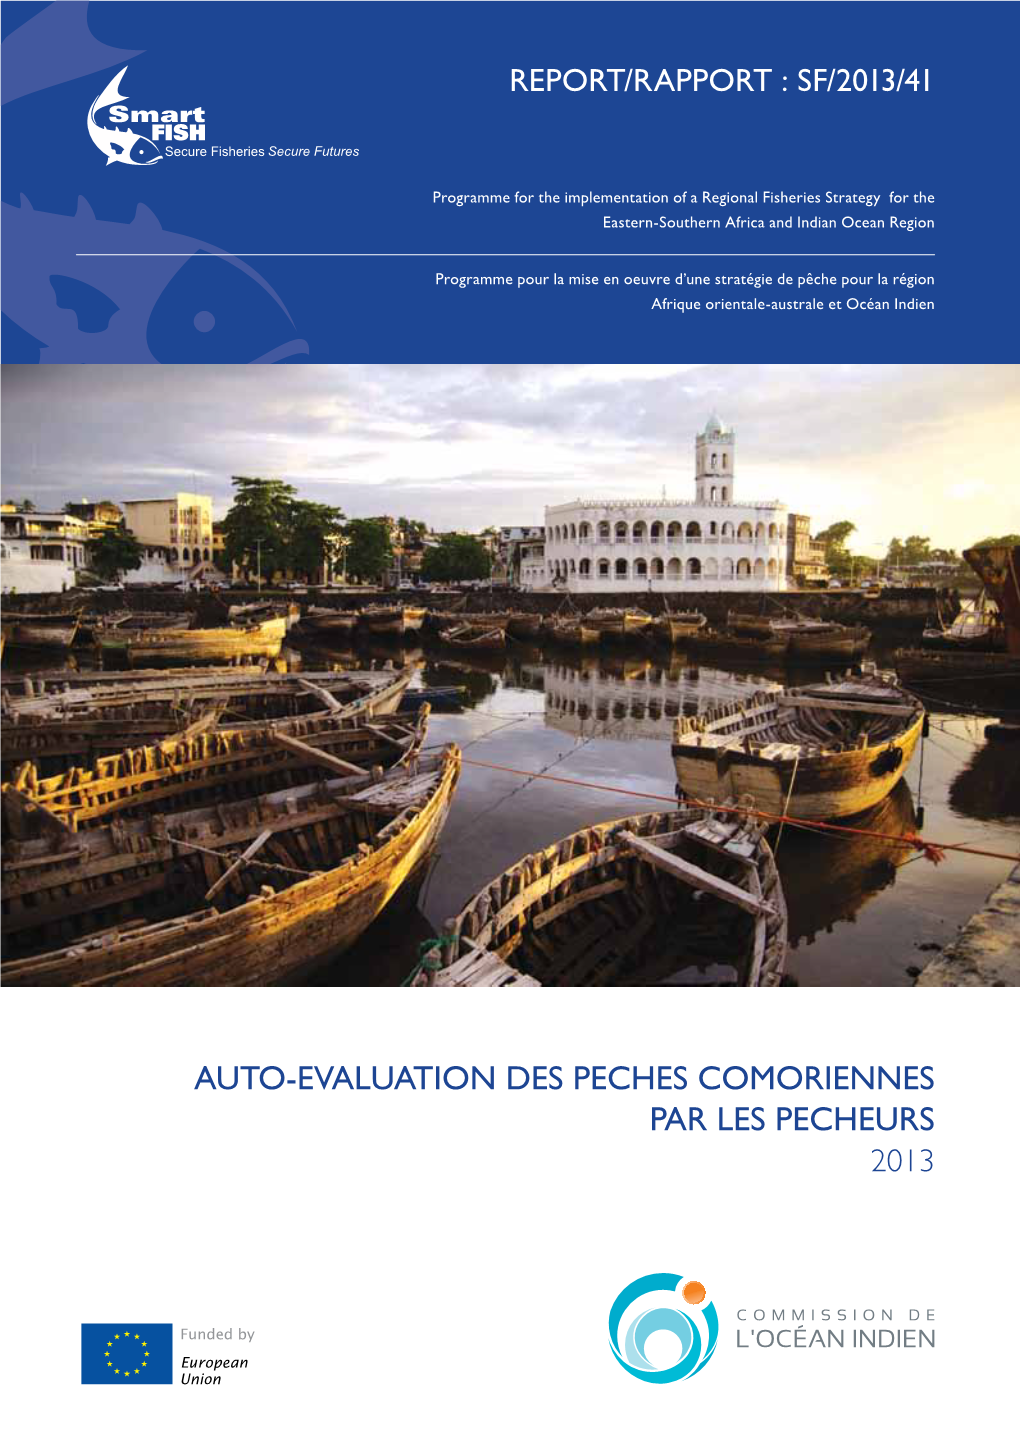 AUTO-EVALUATION DES PECHES COMORIENNES PAR LES PECHEURS 2013 Implementation of a Regional Fisheries Strategy for the Eastern-Southern Africa and Indian Ocean Region